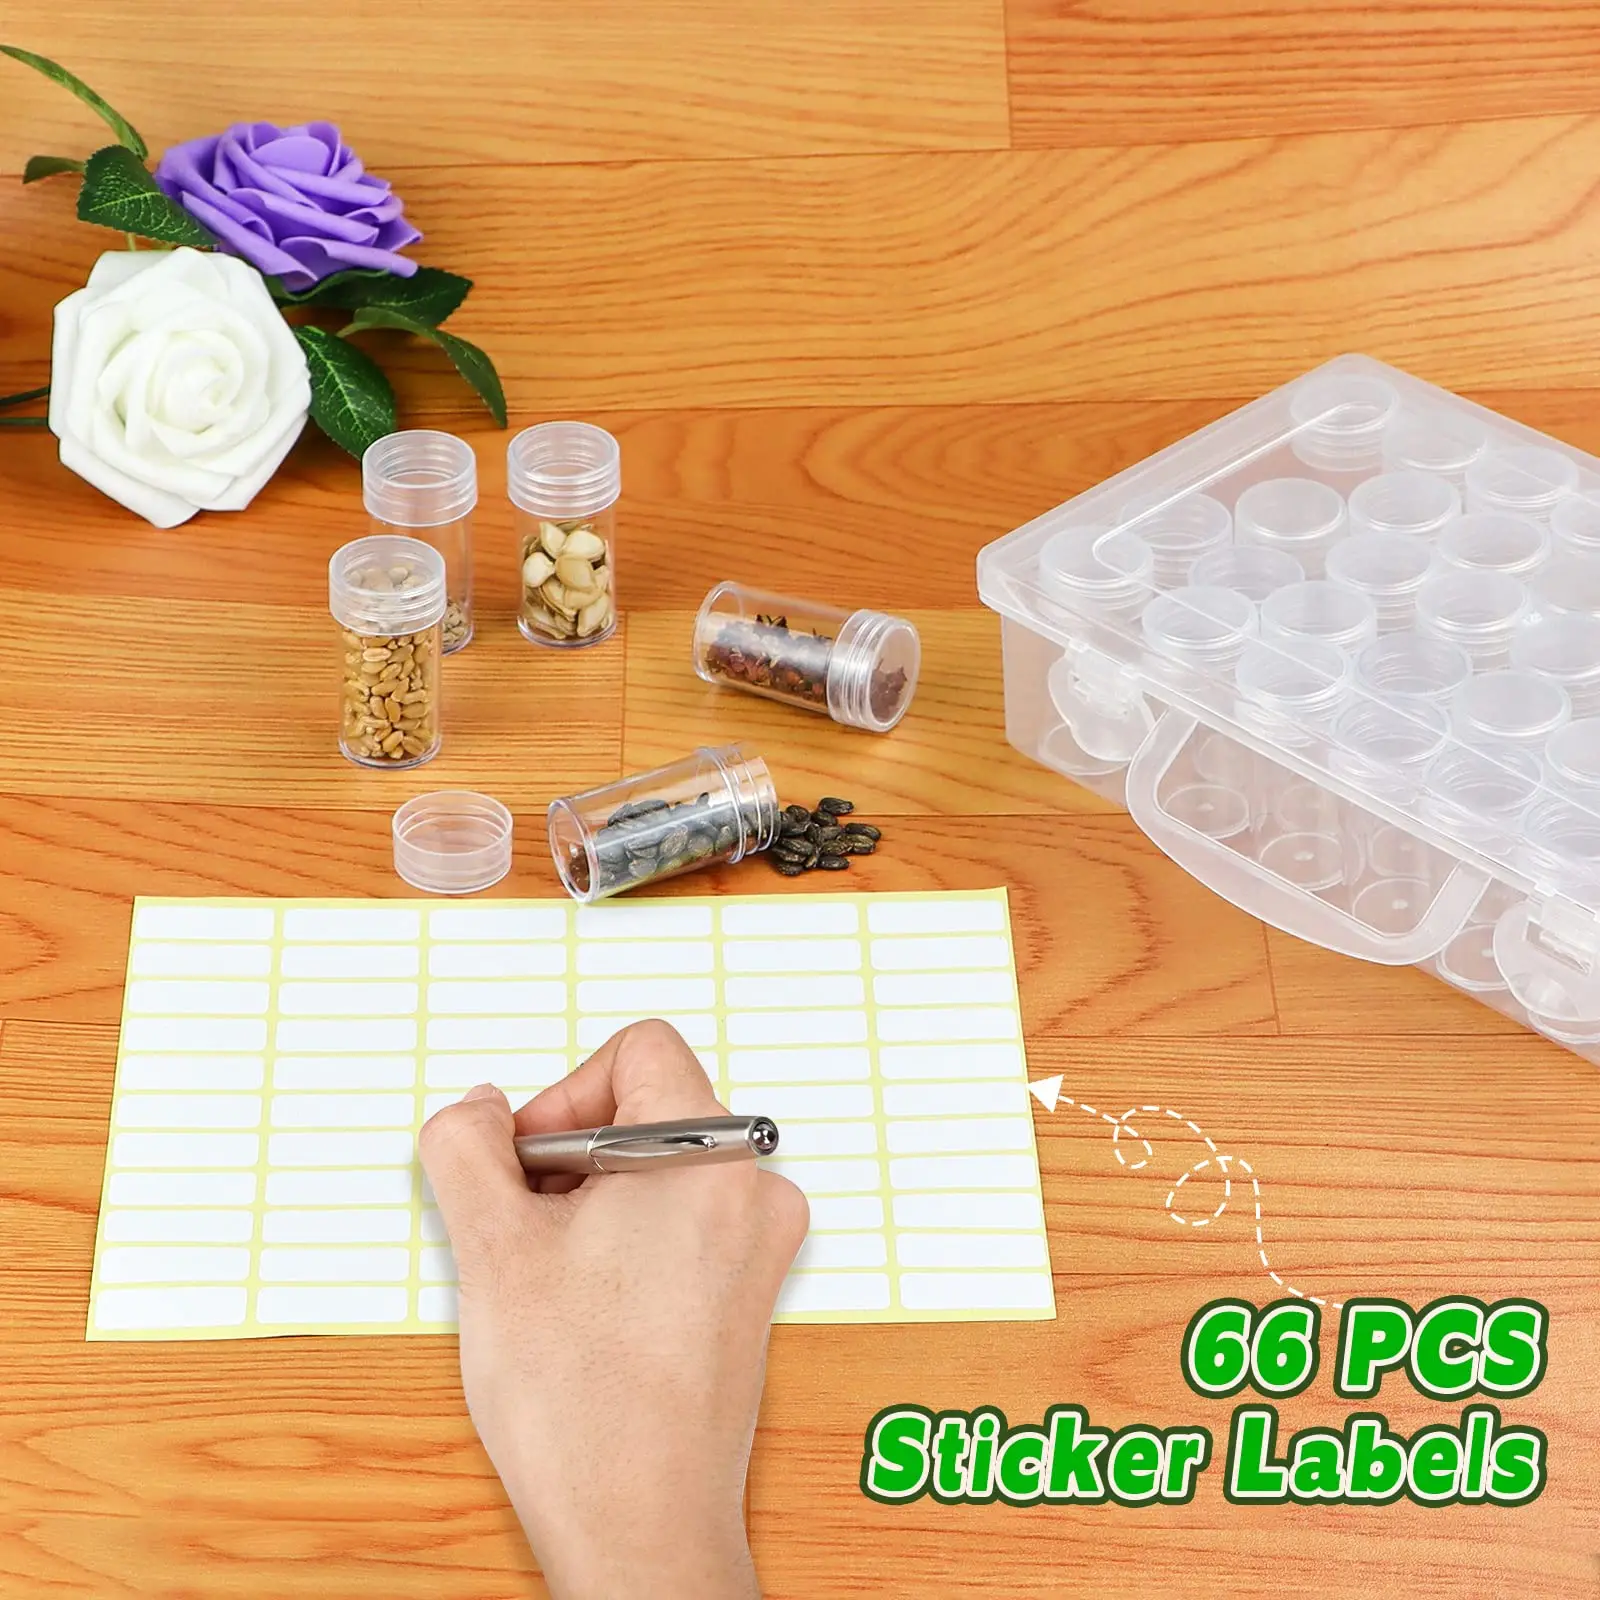 38 Slots Seed Container Organizer Use for Flower Vegetable Clover Seed Storage Box Portable Independent Case with Label Sticker images - 6